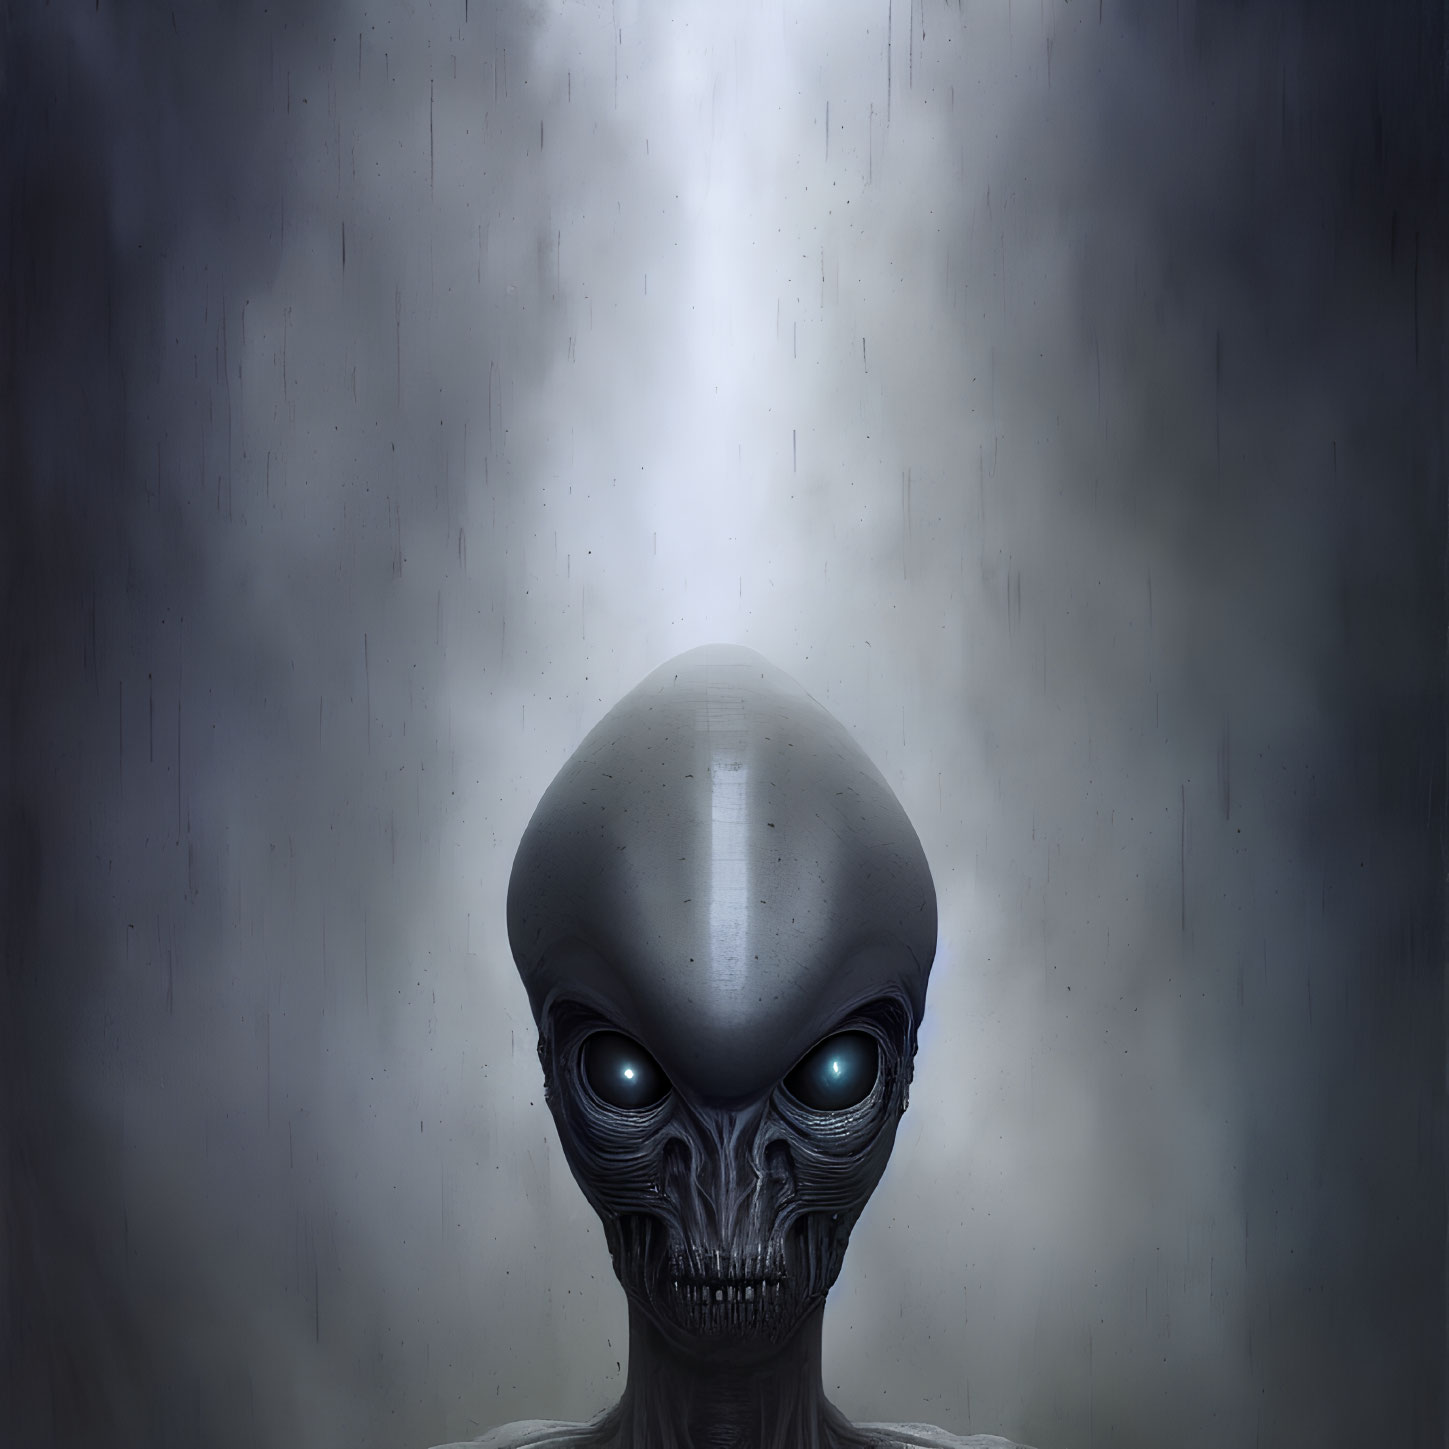 Detailed Close-up of Alien with Large Black Eyes in Rainy Scene